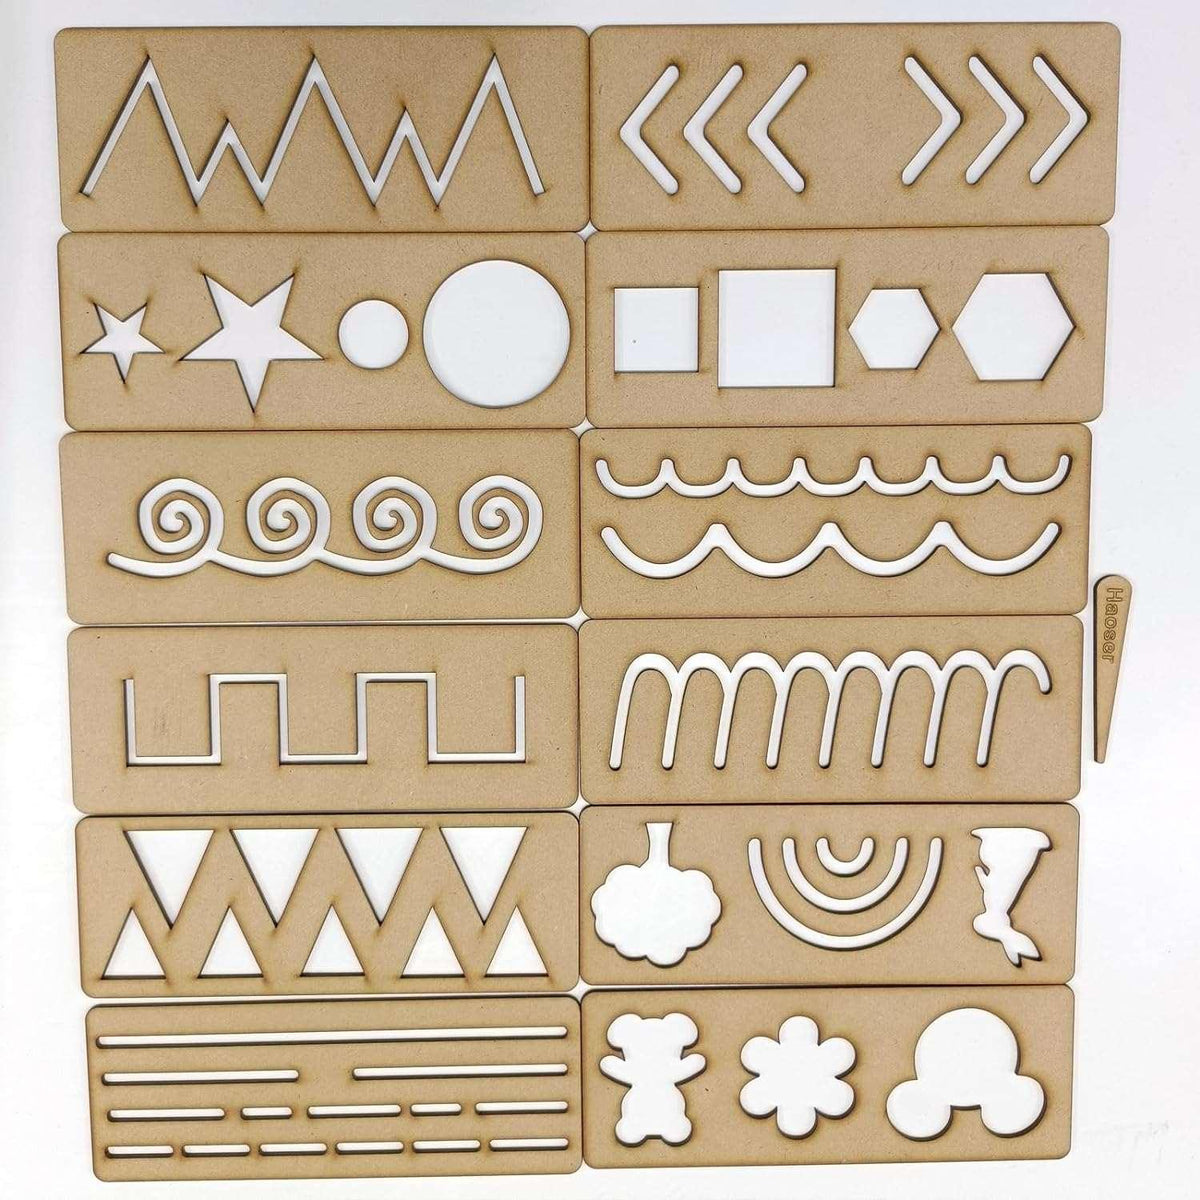 Haoser Wooden Line Tracing Board Prewriting Tracing Tiles a Set of 12 Tracing Tiles Montessori Learning Resources for Pre Writing Skills Development and Motor Skills Enhancement - Haoser